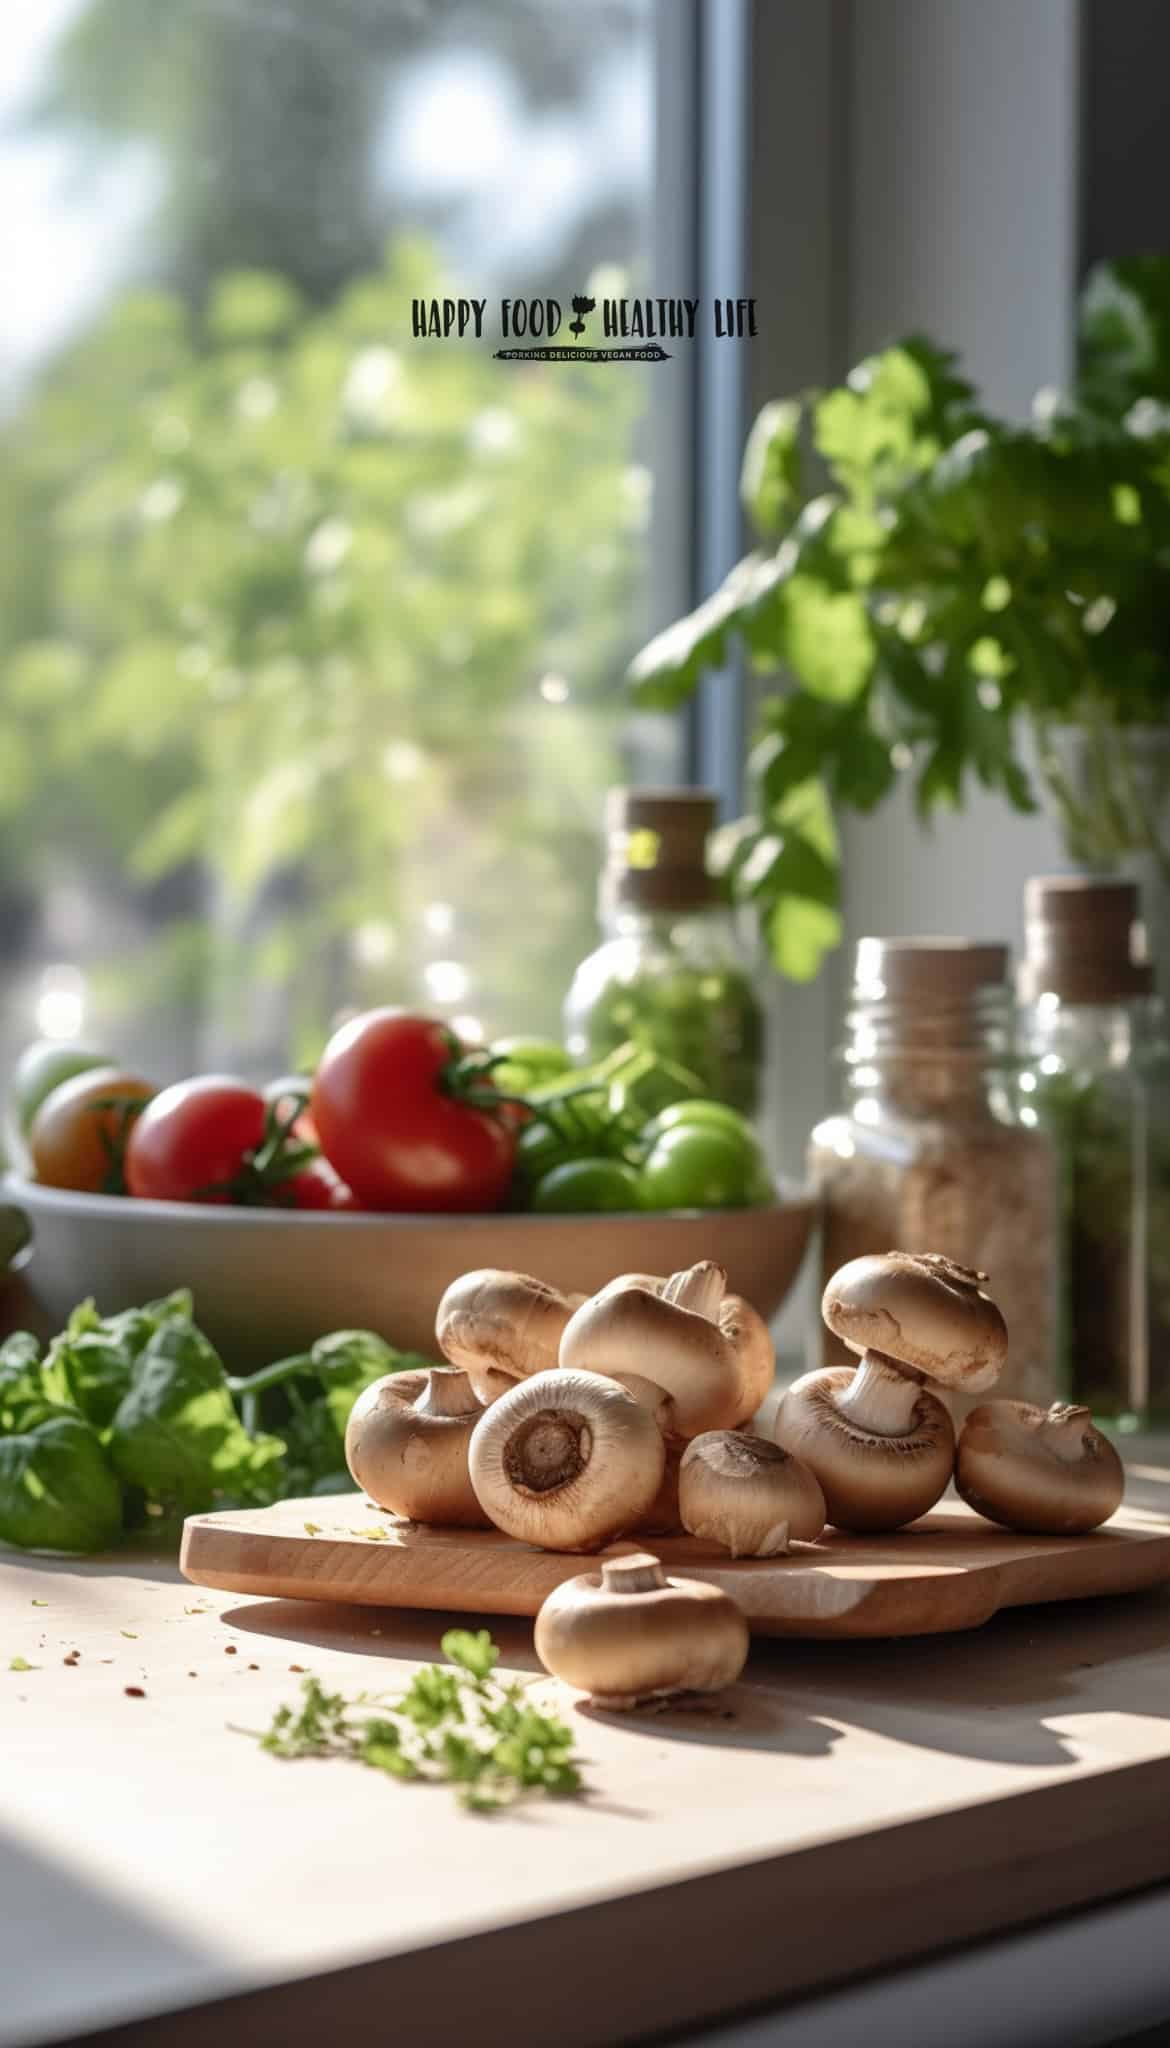 brown mushrooms on a wooden cutting board sitting in front of a bowl of tomatoes which is in front of a window with greenery